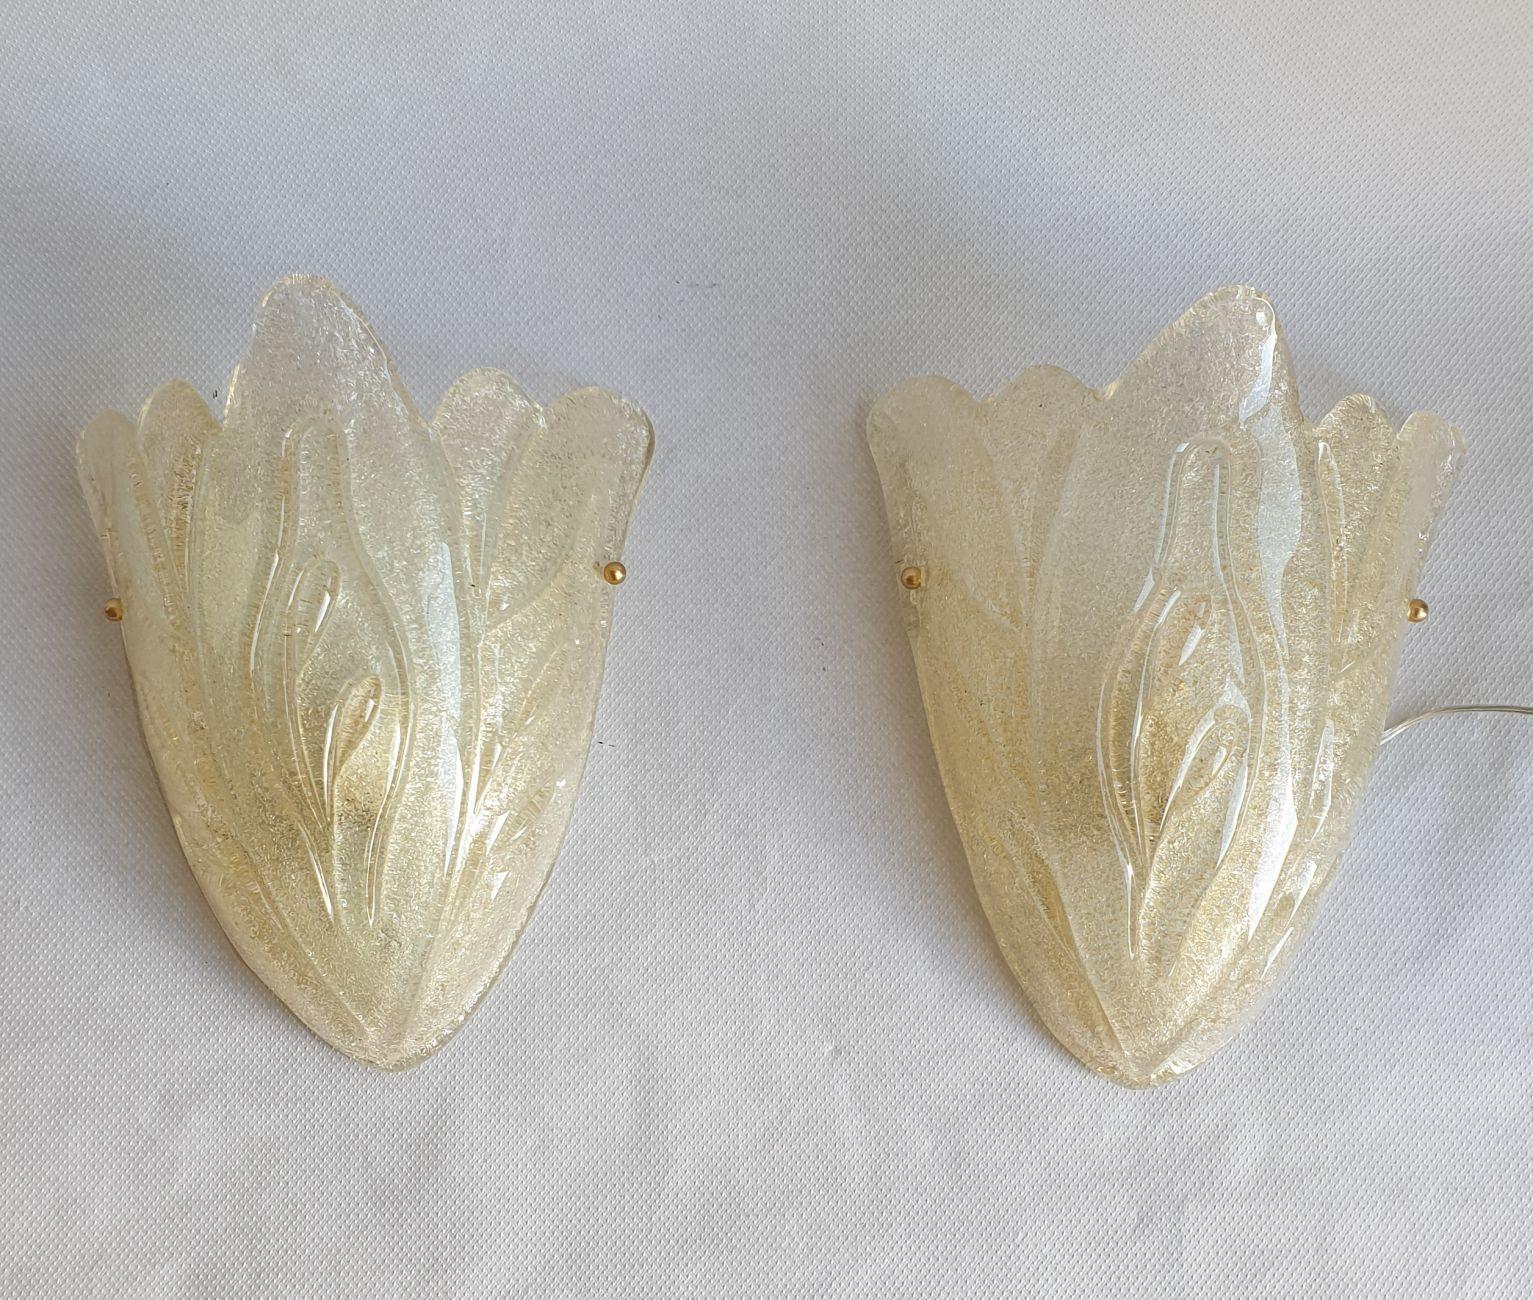 Pair of Neoclassical style Murano glass sconces, Italy 1970s.
One single piece of handmade Murano glass leaf with a graniglia finish inside for those sconces.
The glass is translucent, with some gold/champagne color reflections.
The frame is